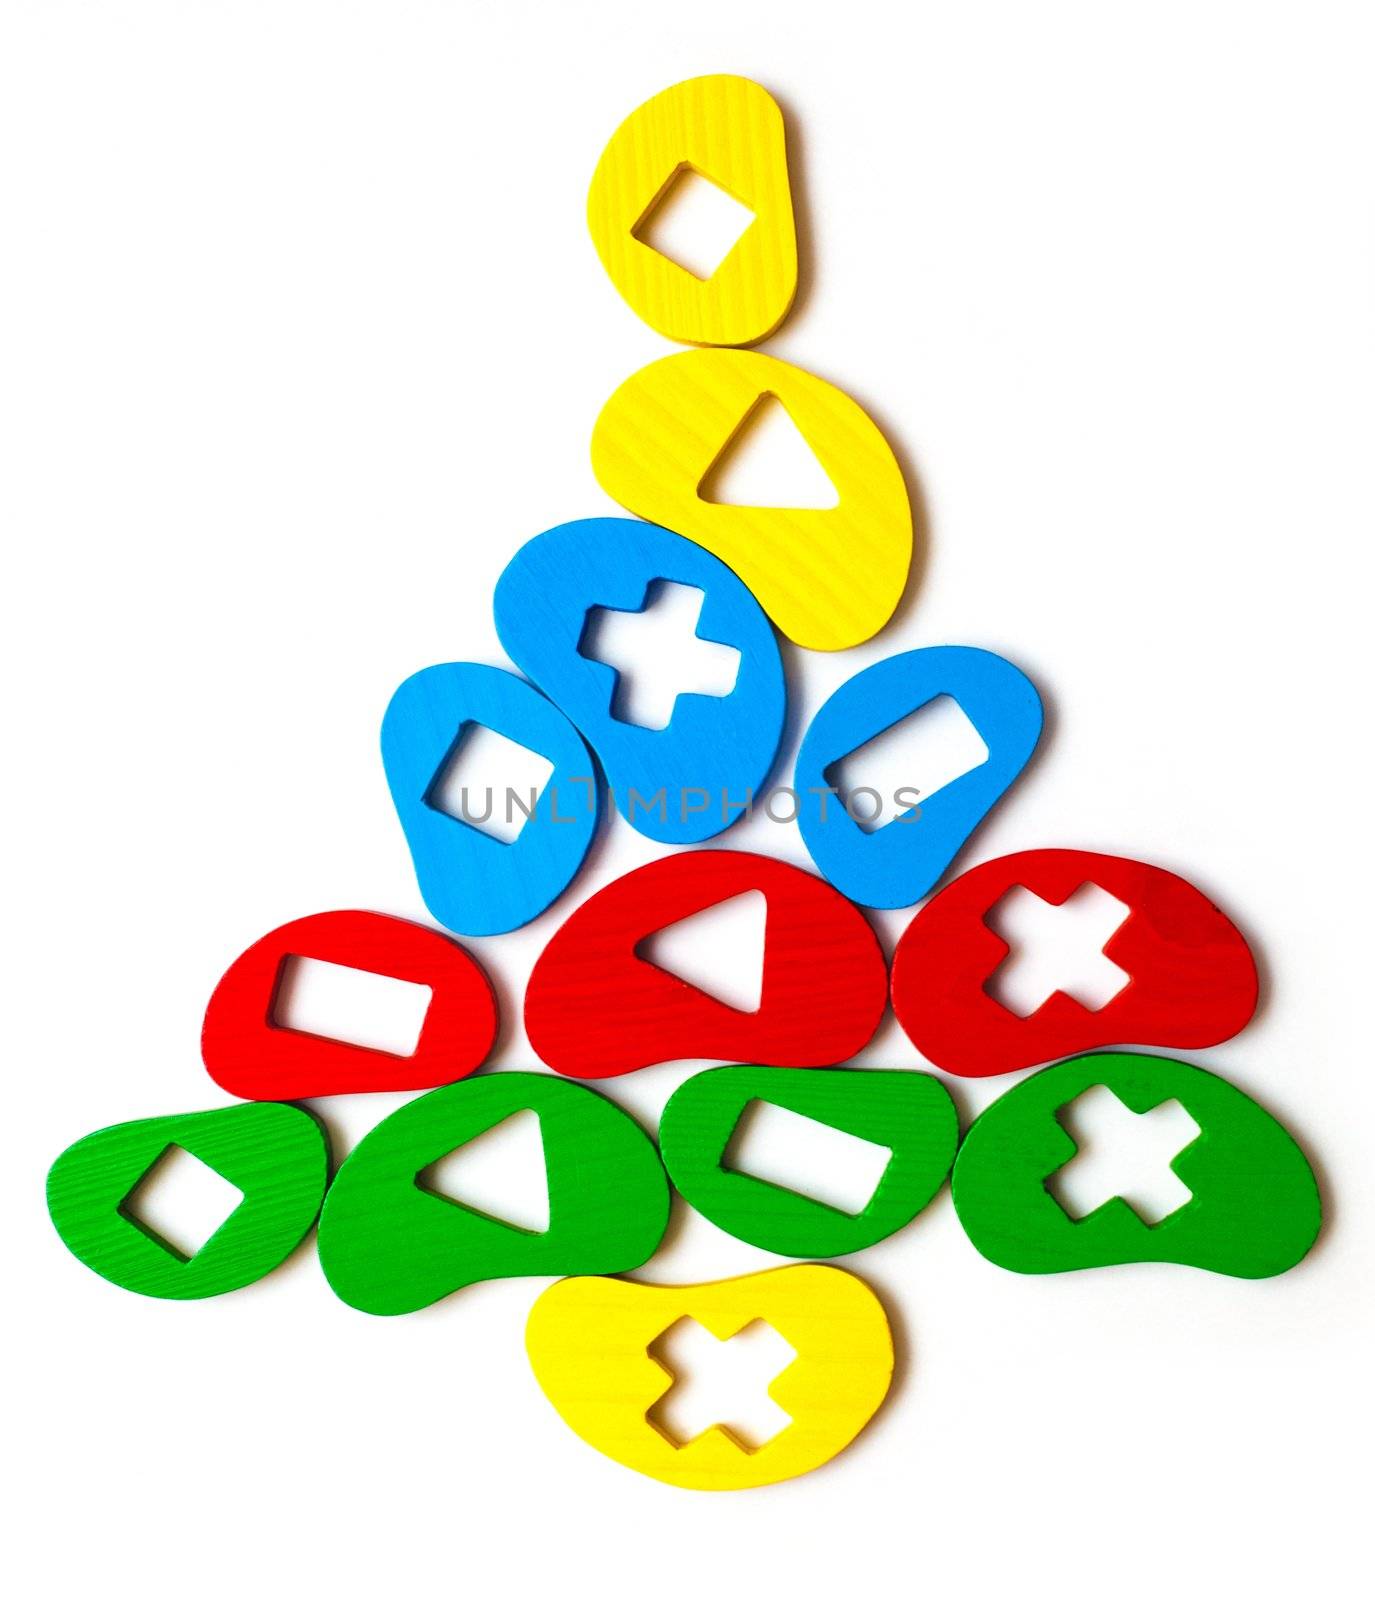 Christmas tree toy of the elements, geometric shapes, bright colors